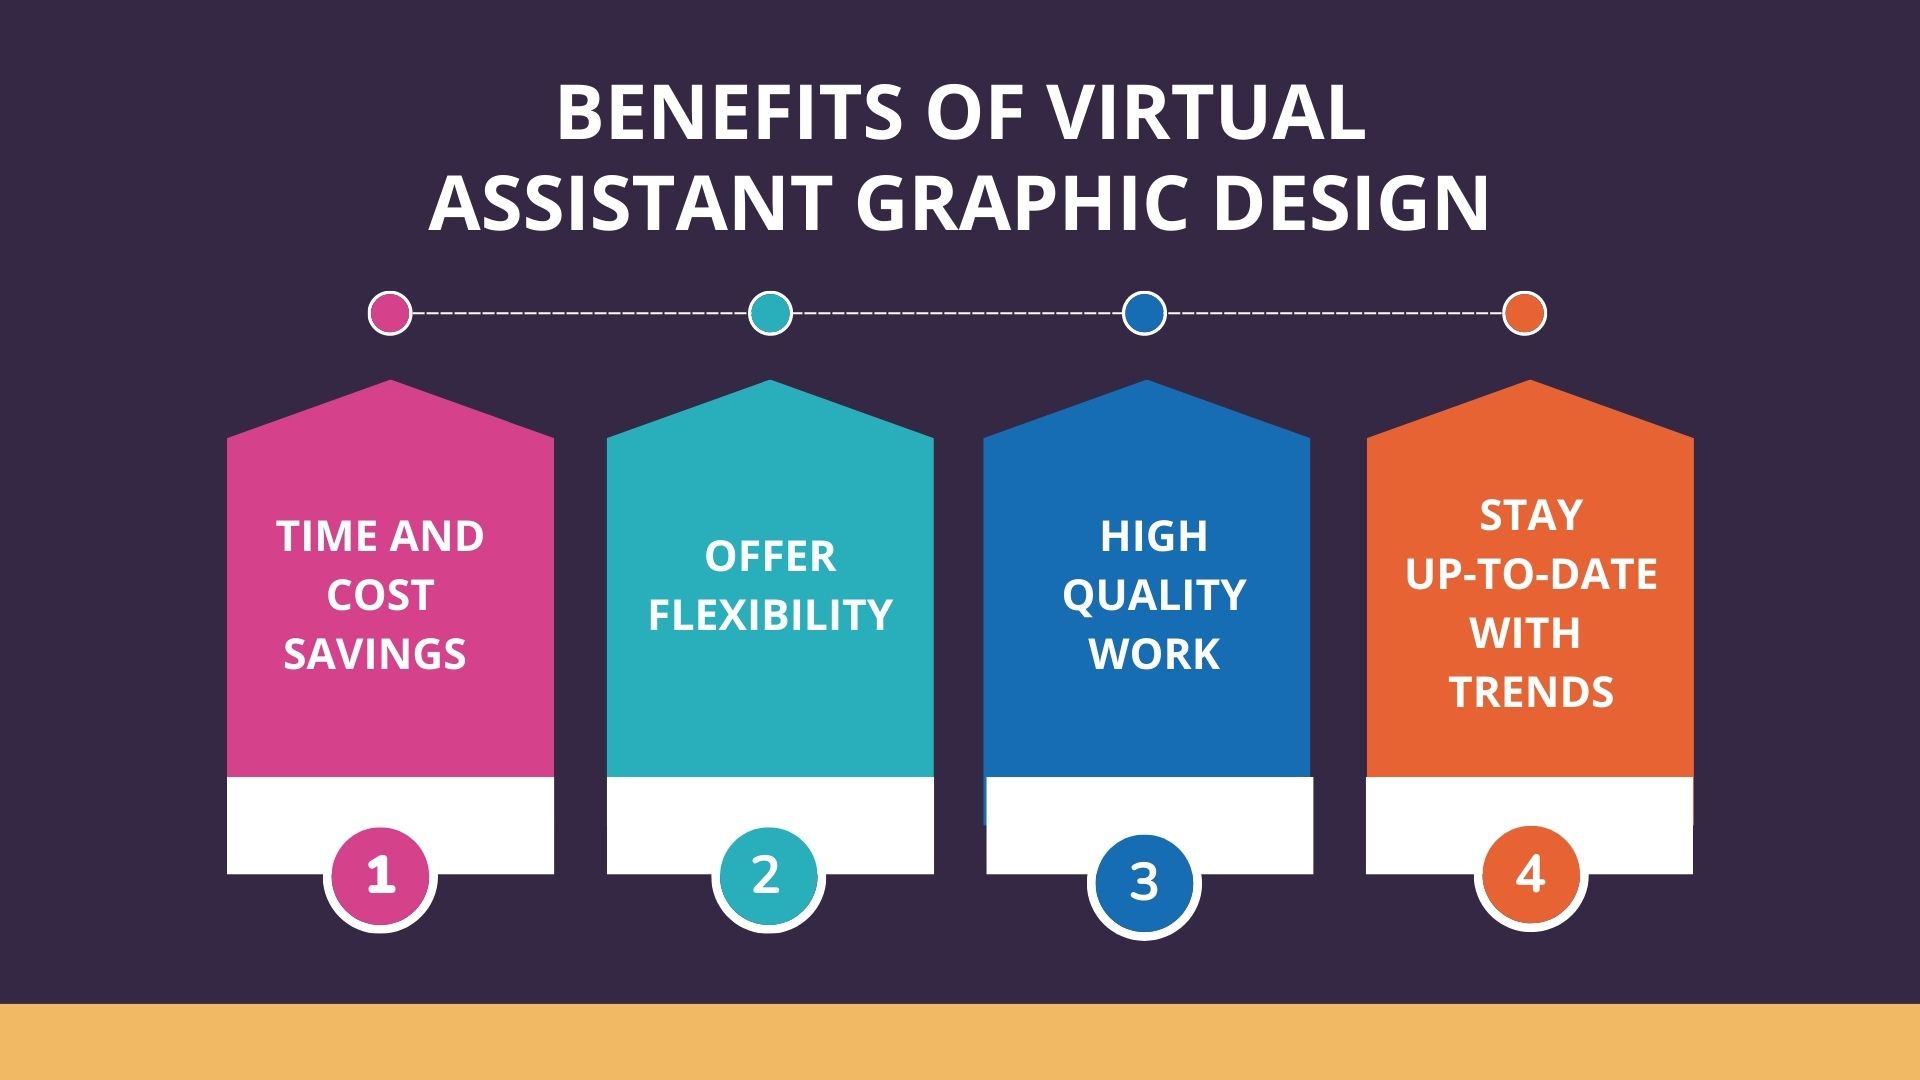 Benefits of Graphic Design Virtual Assistant